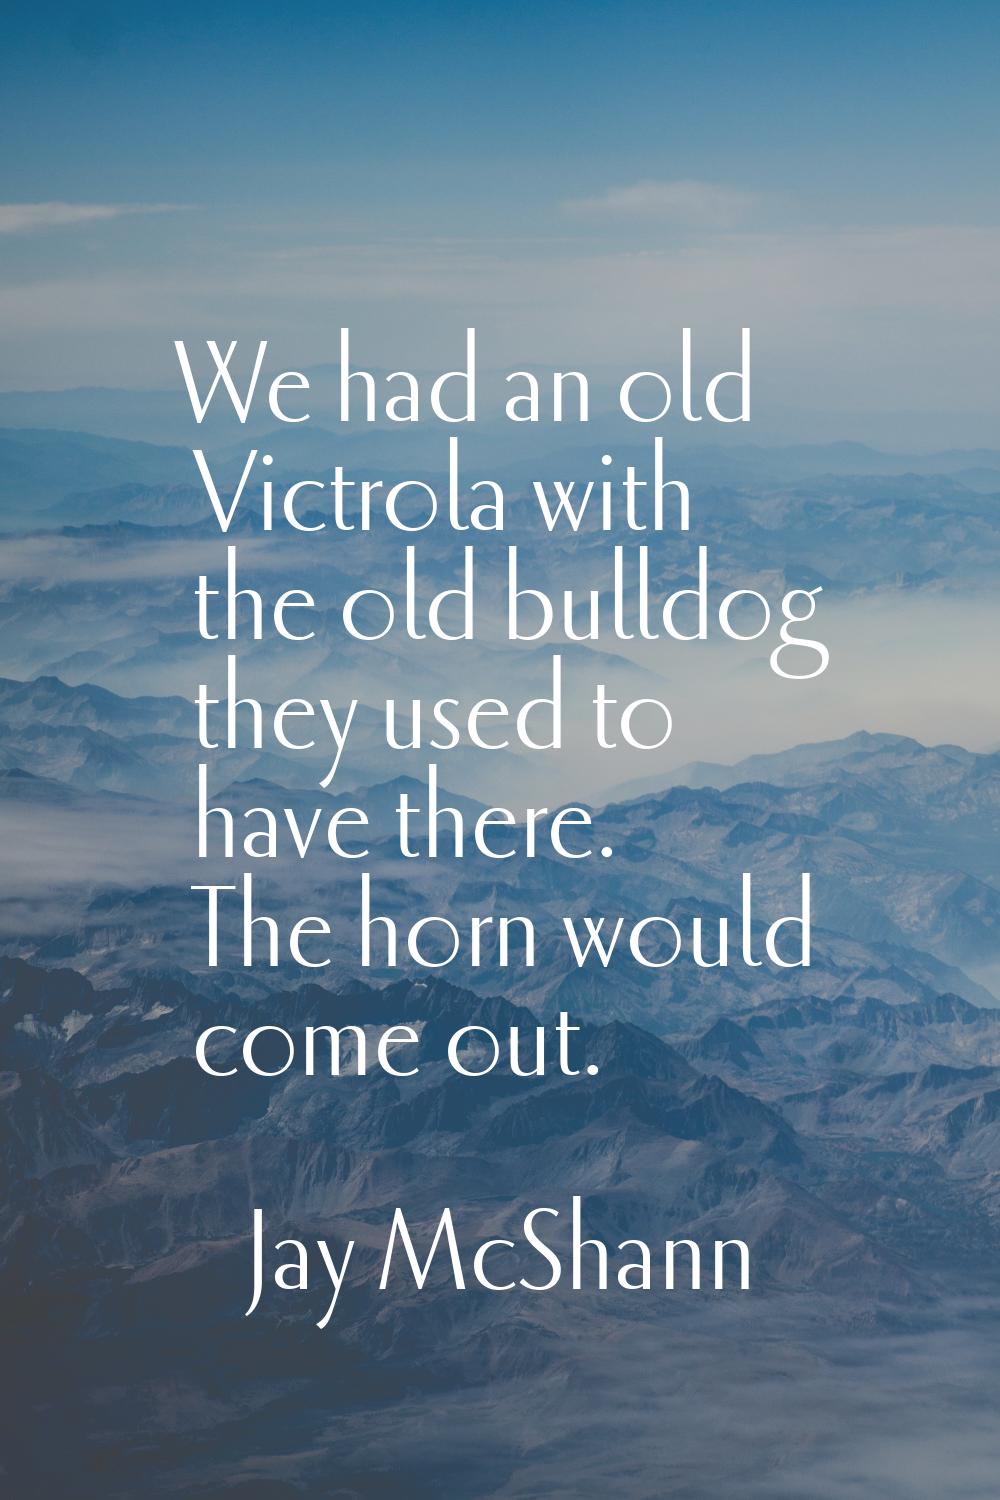 We had an old Victrola with the old bulldog they used to have there. The horn would come out.